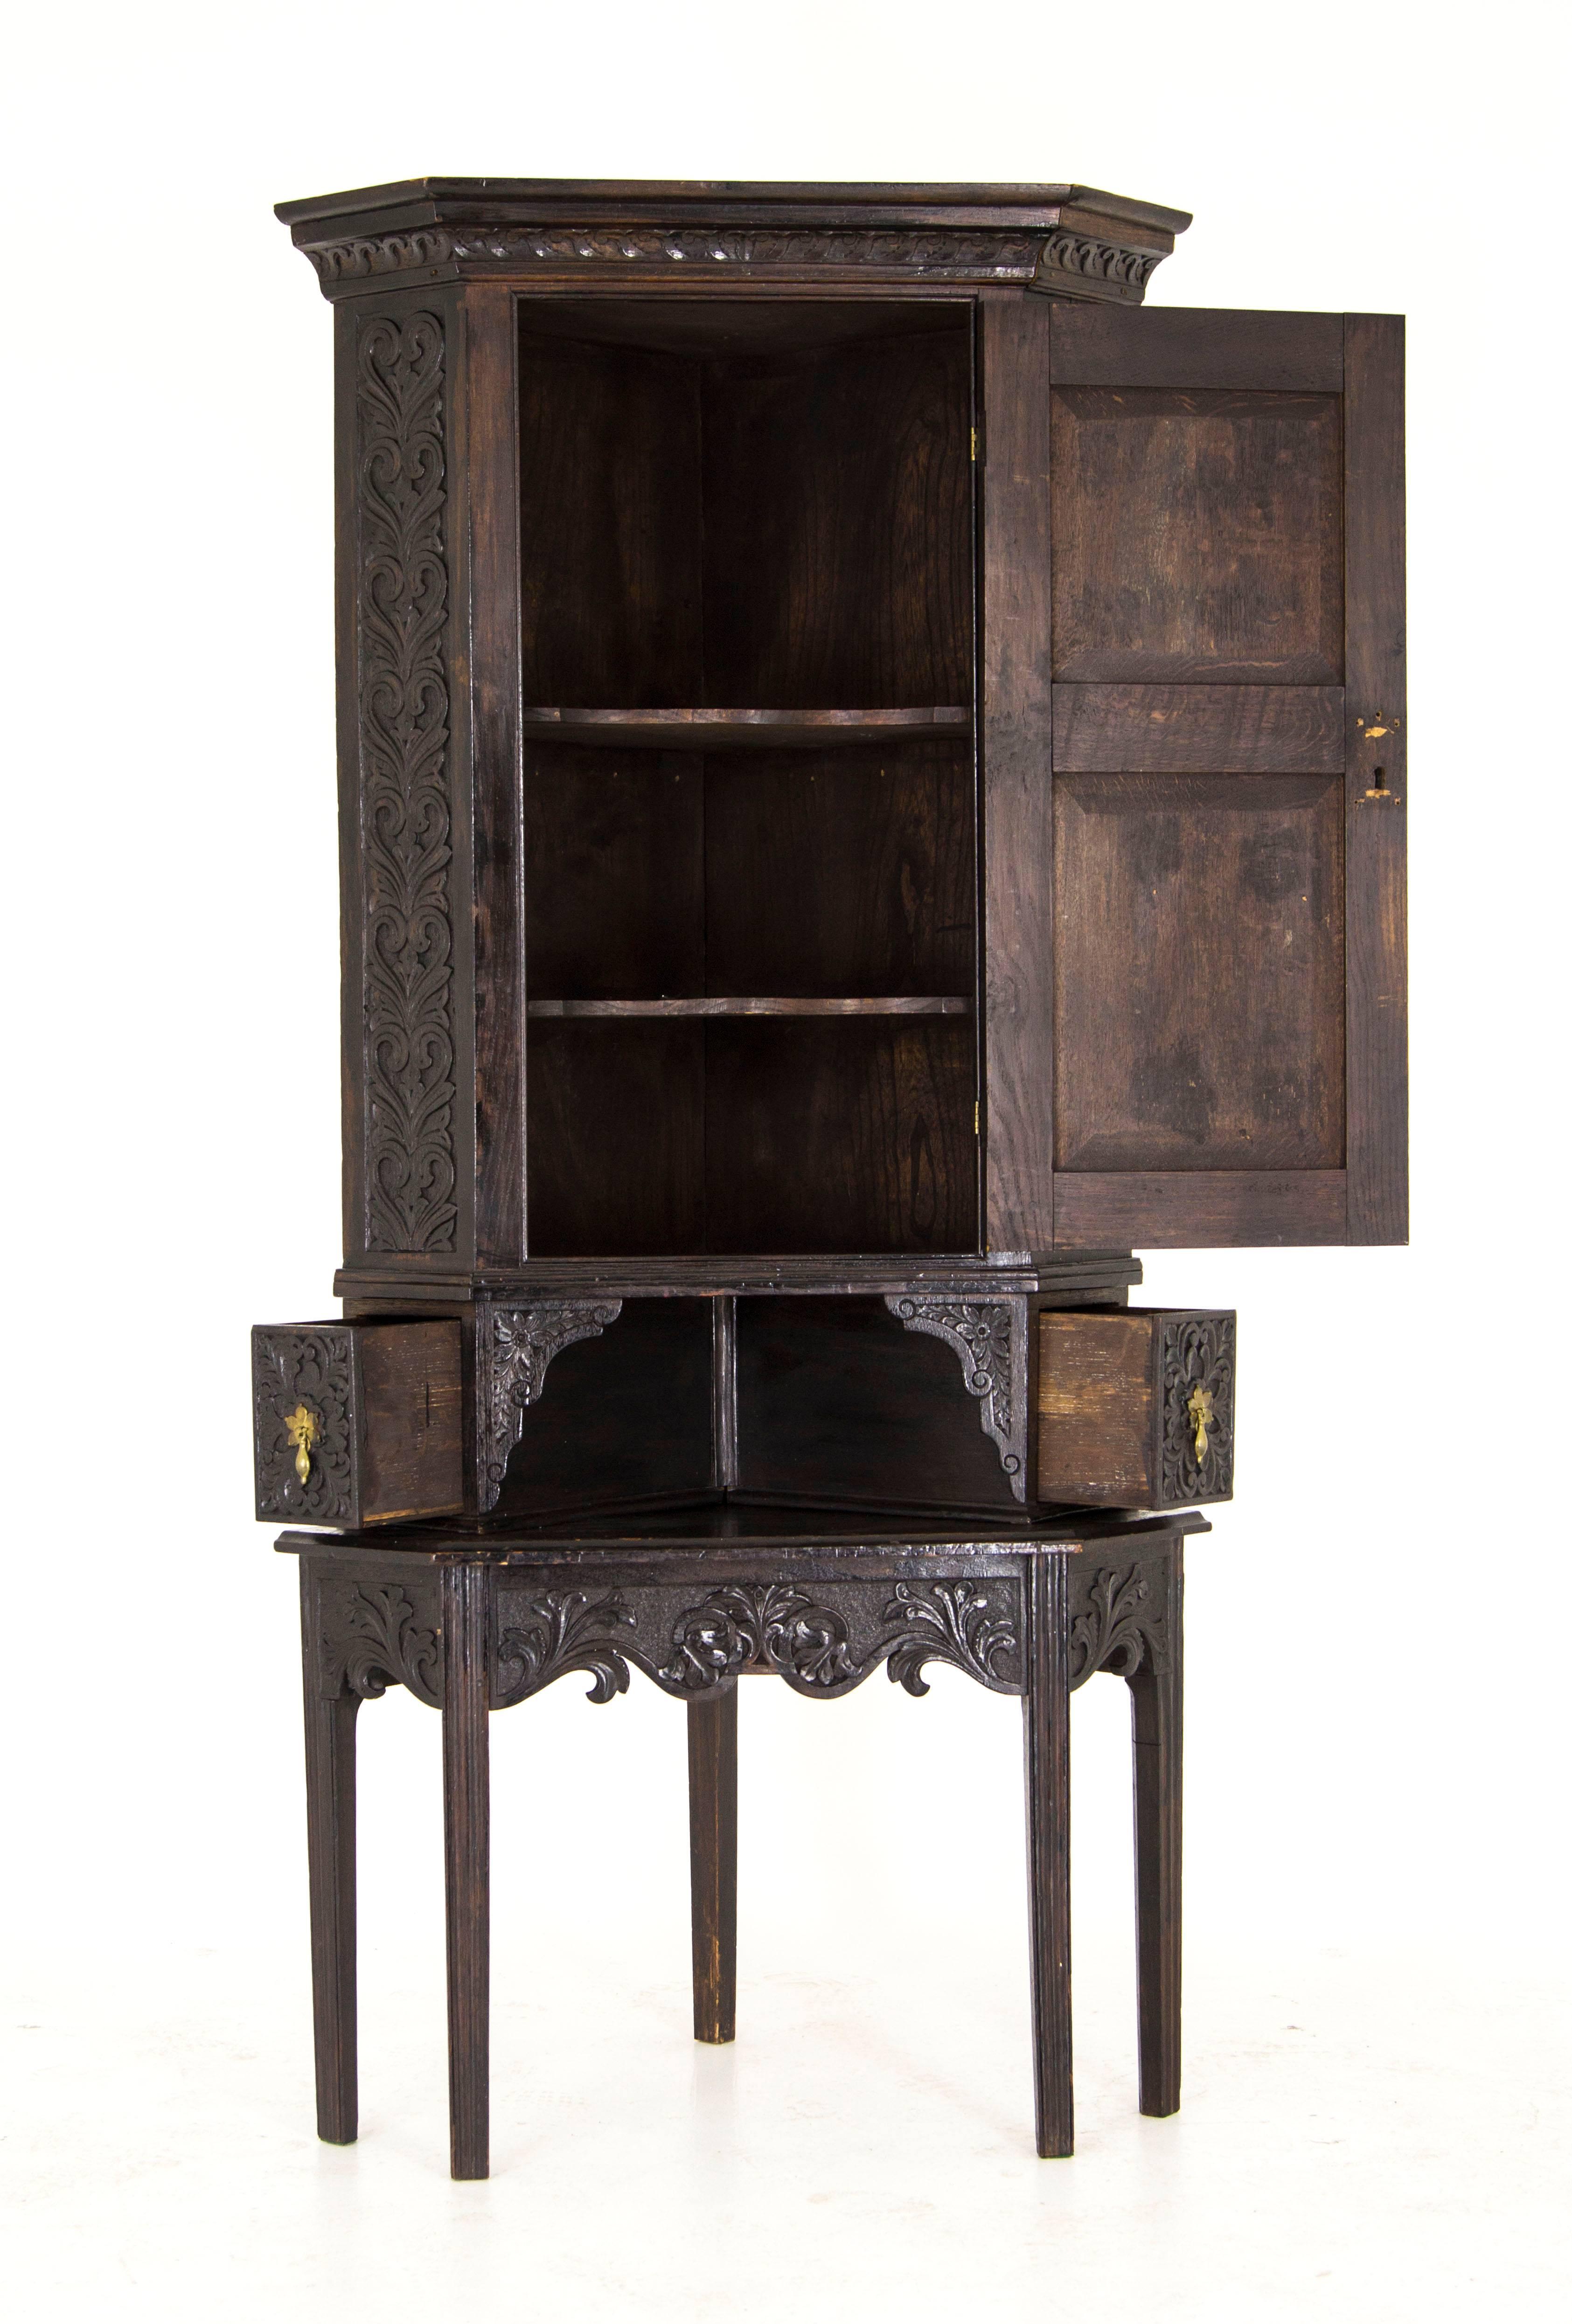 Scotland, 1830
Carved cornice above
Solid carved oak panels
Single carved door has original brass hinges
Carved sides 
Door opens to reveal two exterior shelves
Two small carved drawers on the base of the cabinet.
Sitting on a carved stand